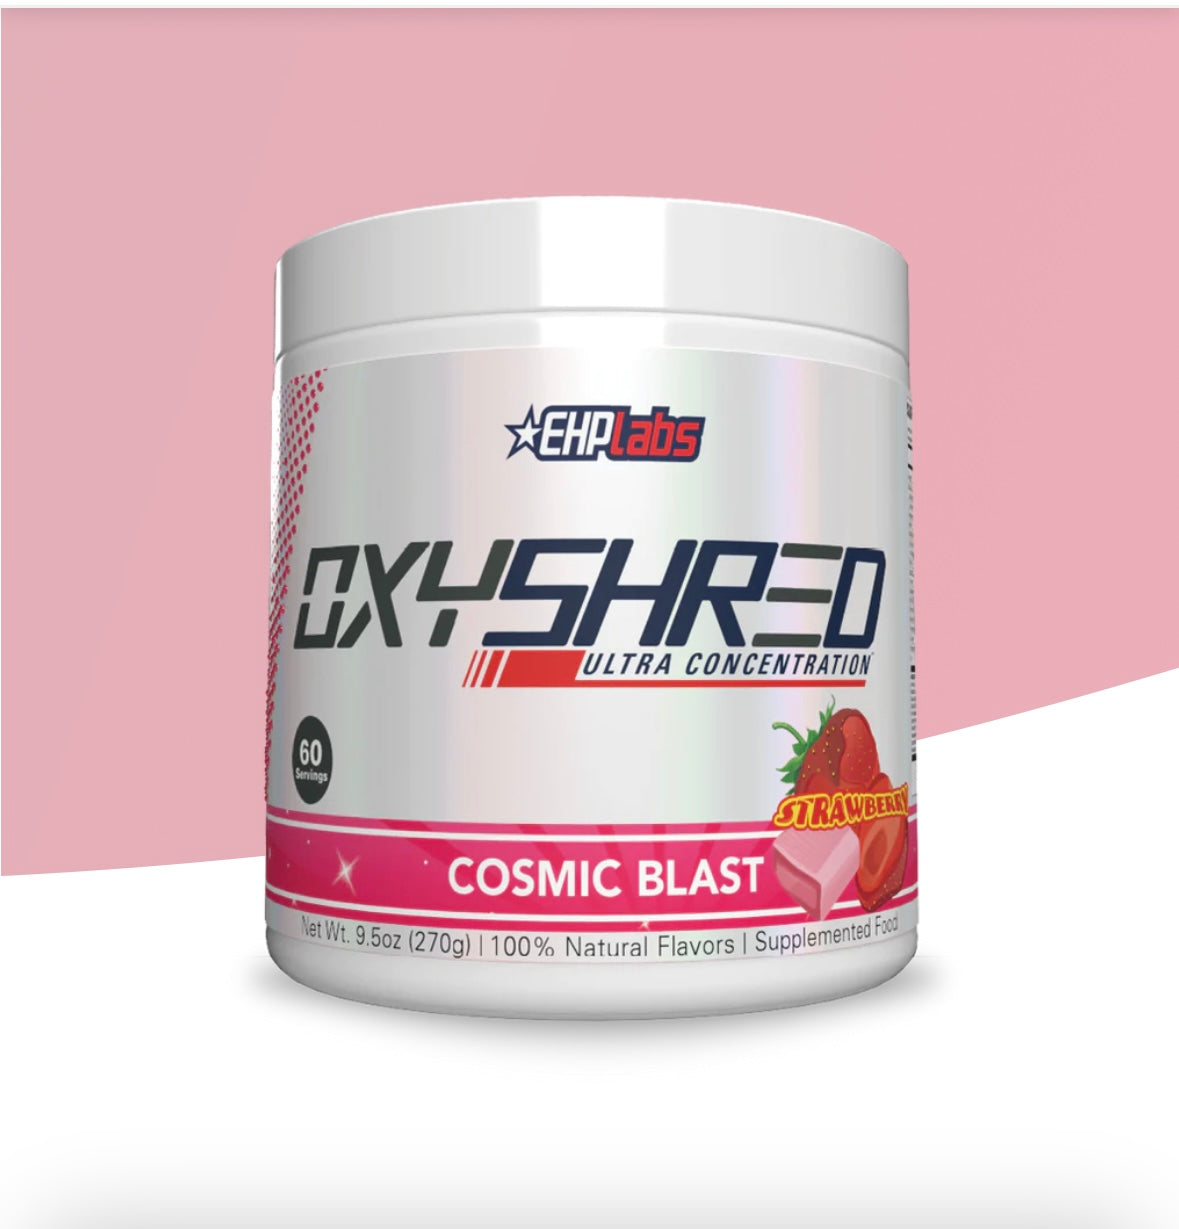 OxyShred Ultra Concentration - Cosmic Blast